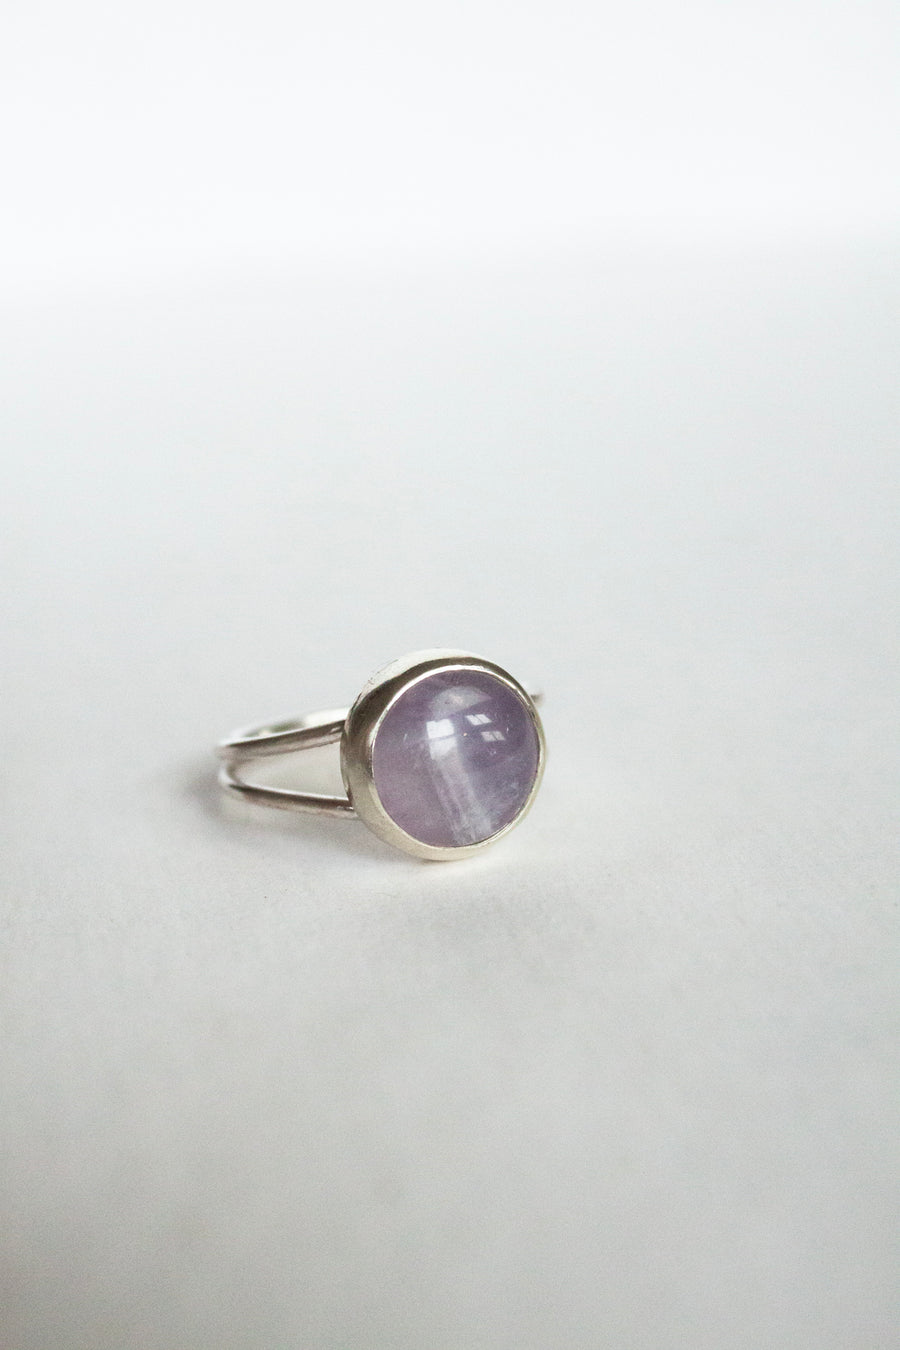 Double Banded Amethyst Ring